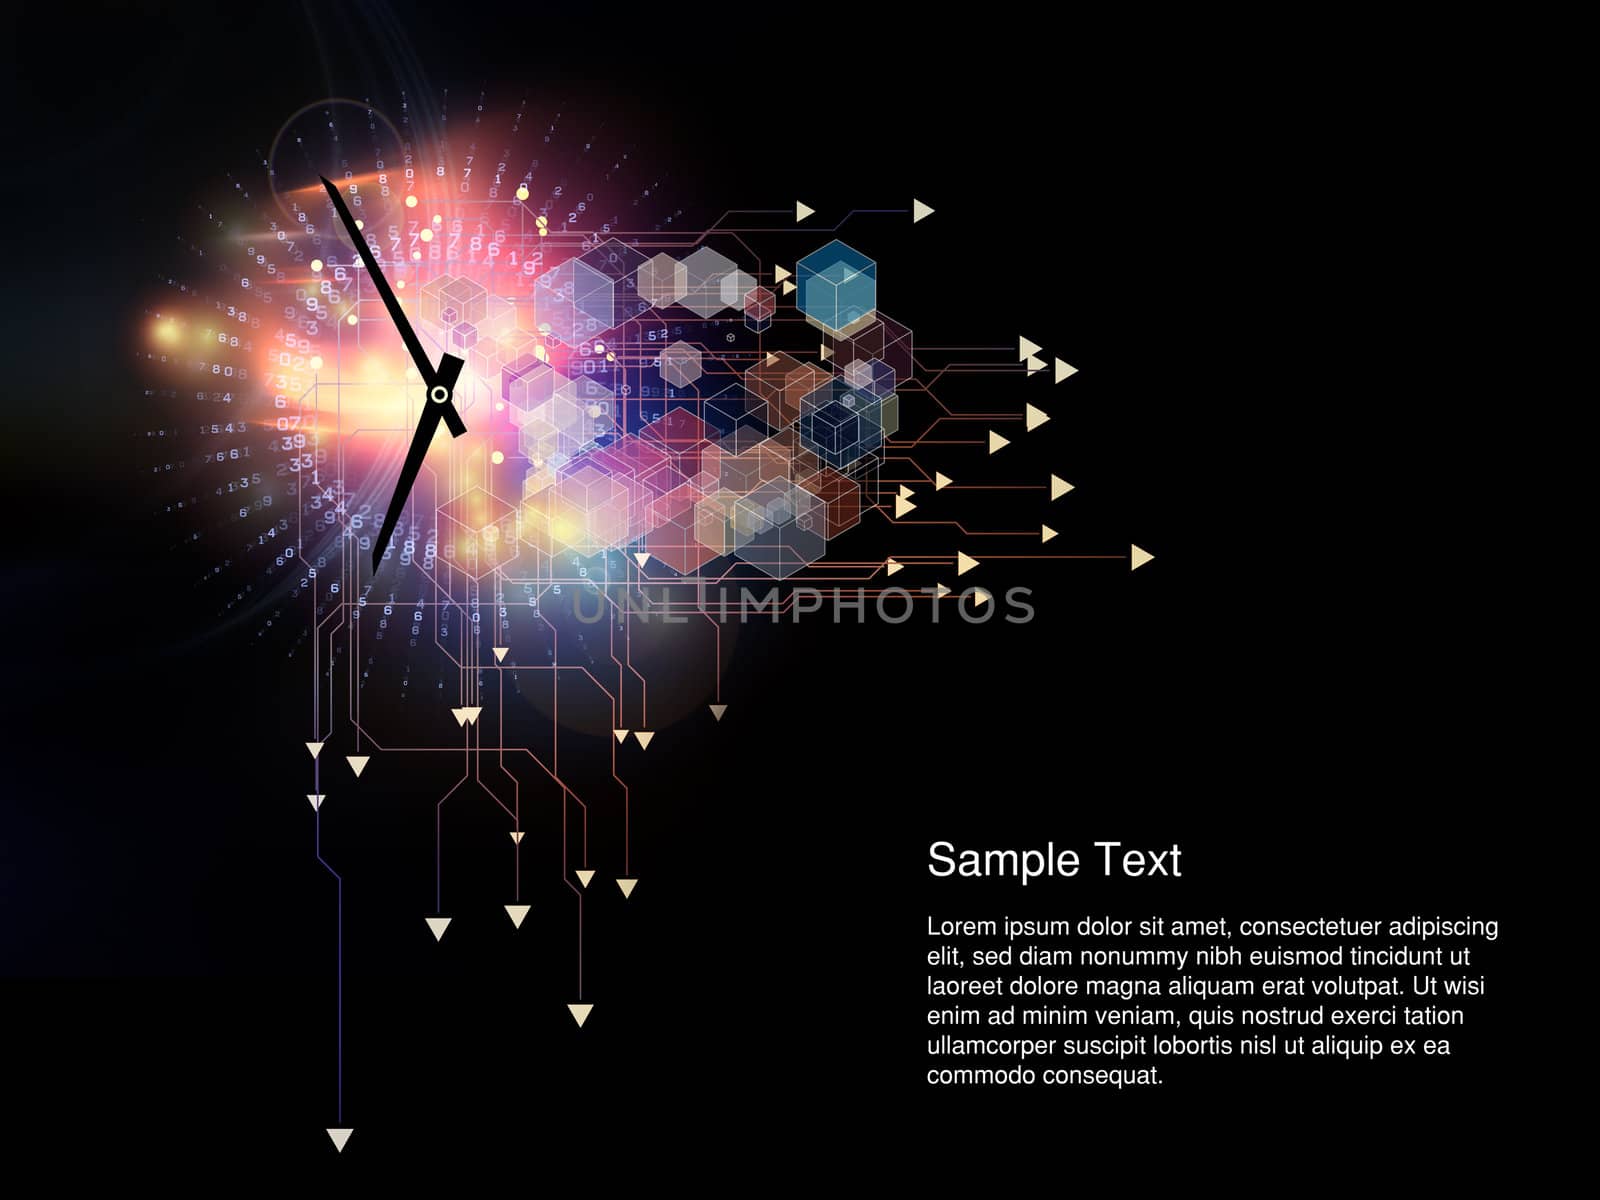 Interplay of digits, network components, clock hands, lights and abstract graphic elements on the subject of modern technologies, time, computers, Internet and virtual reality